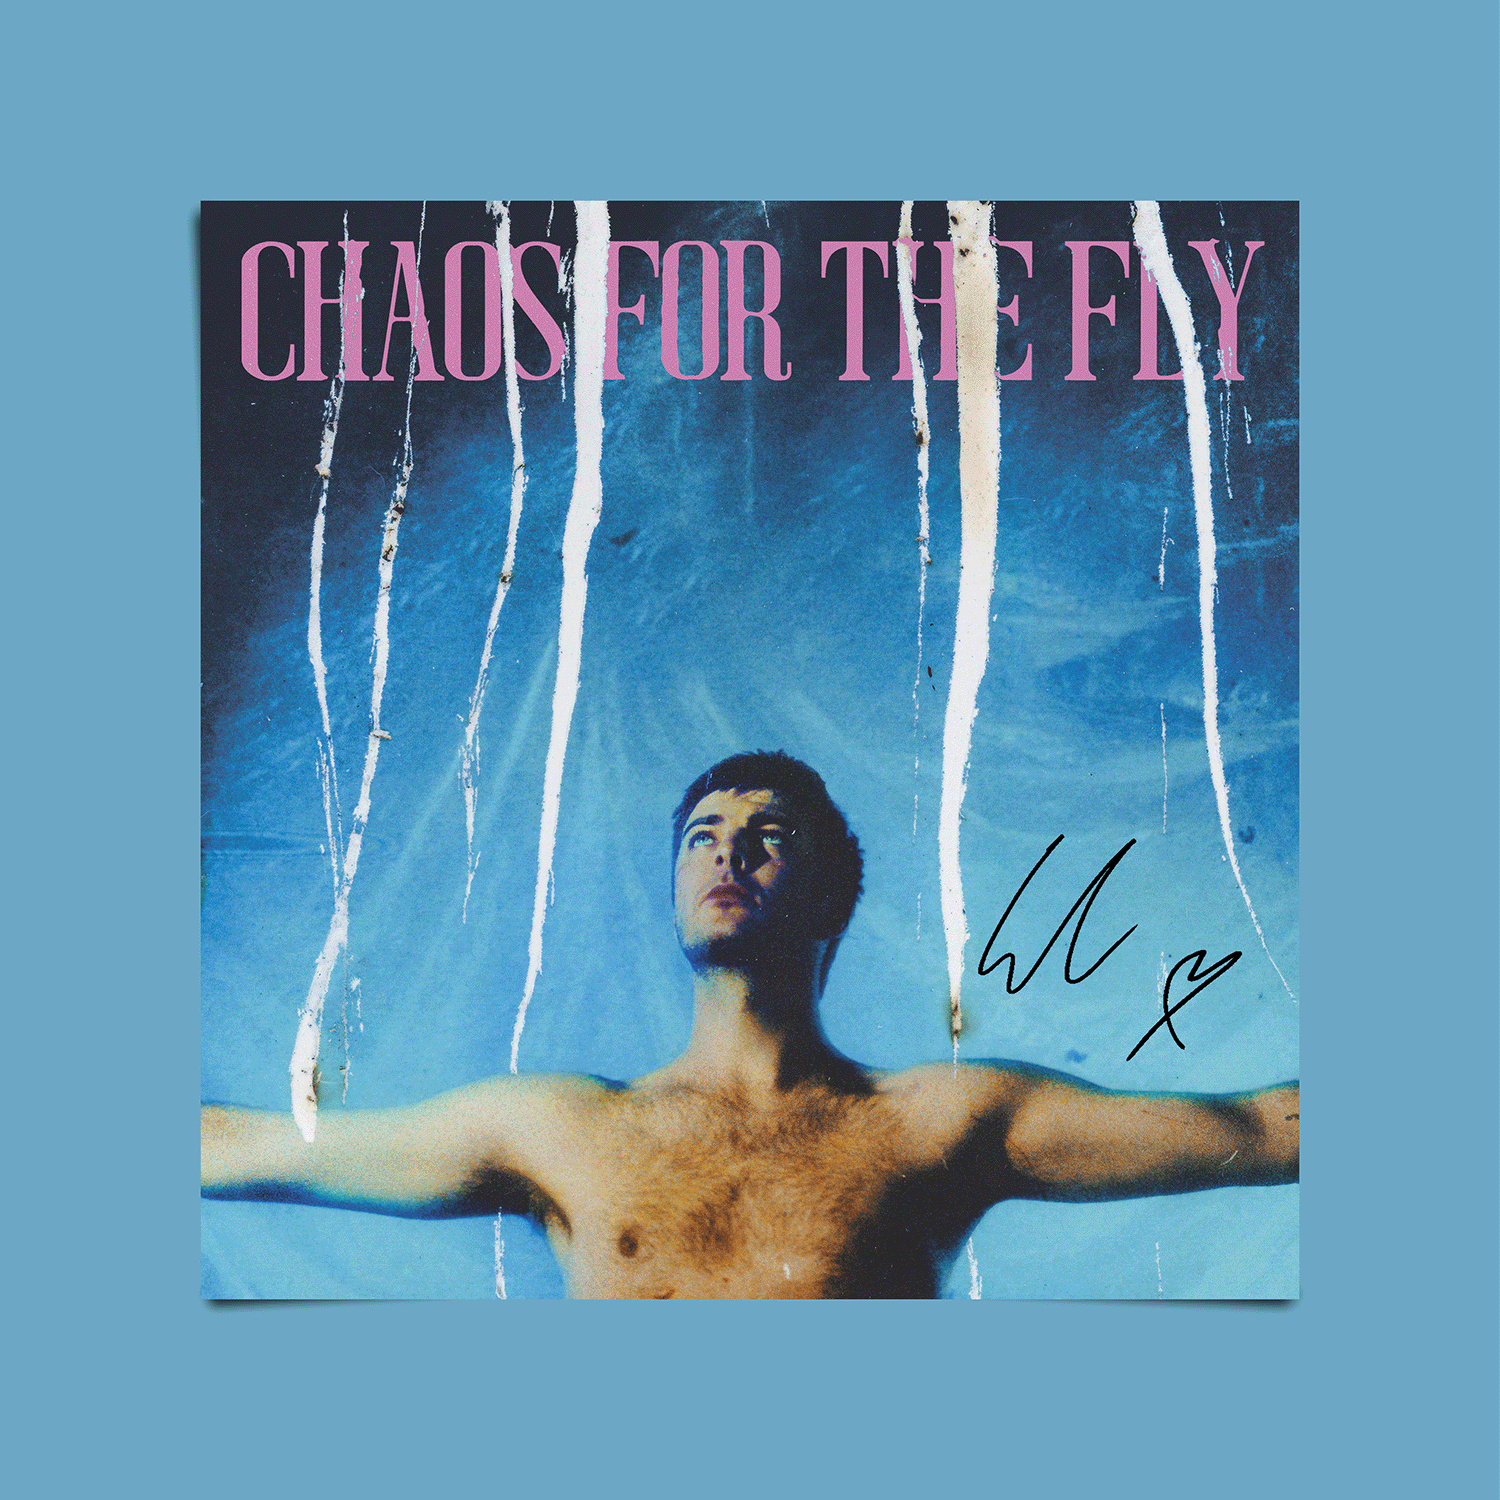 Chaos For The Fly: Limited White Vinyl LP & Signed Print